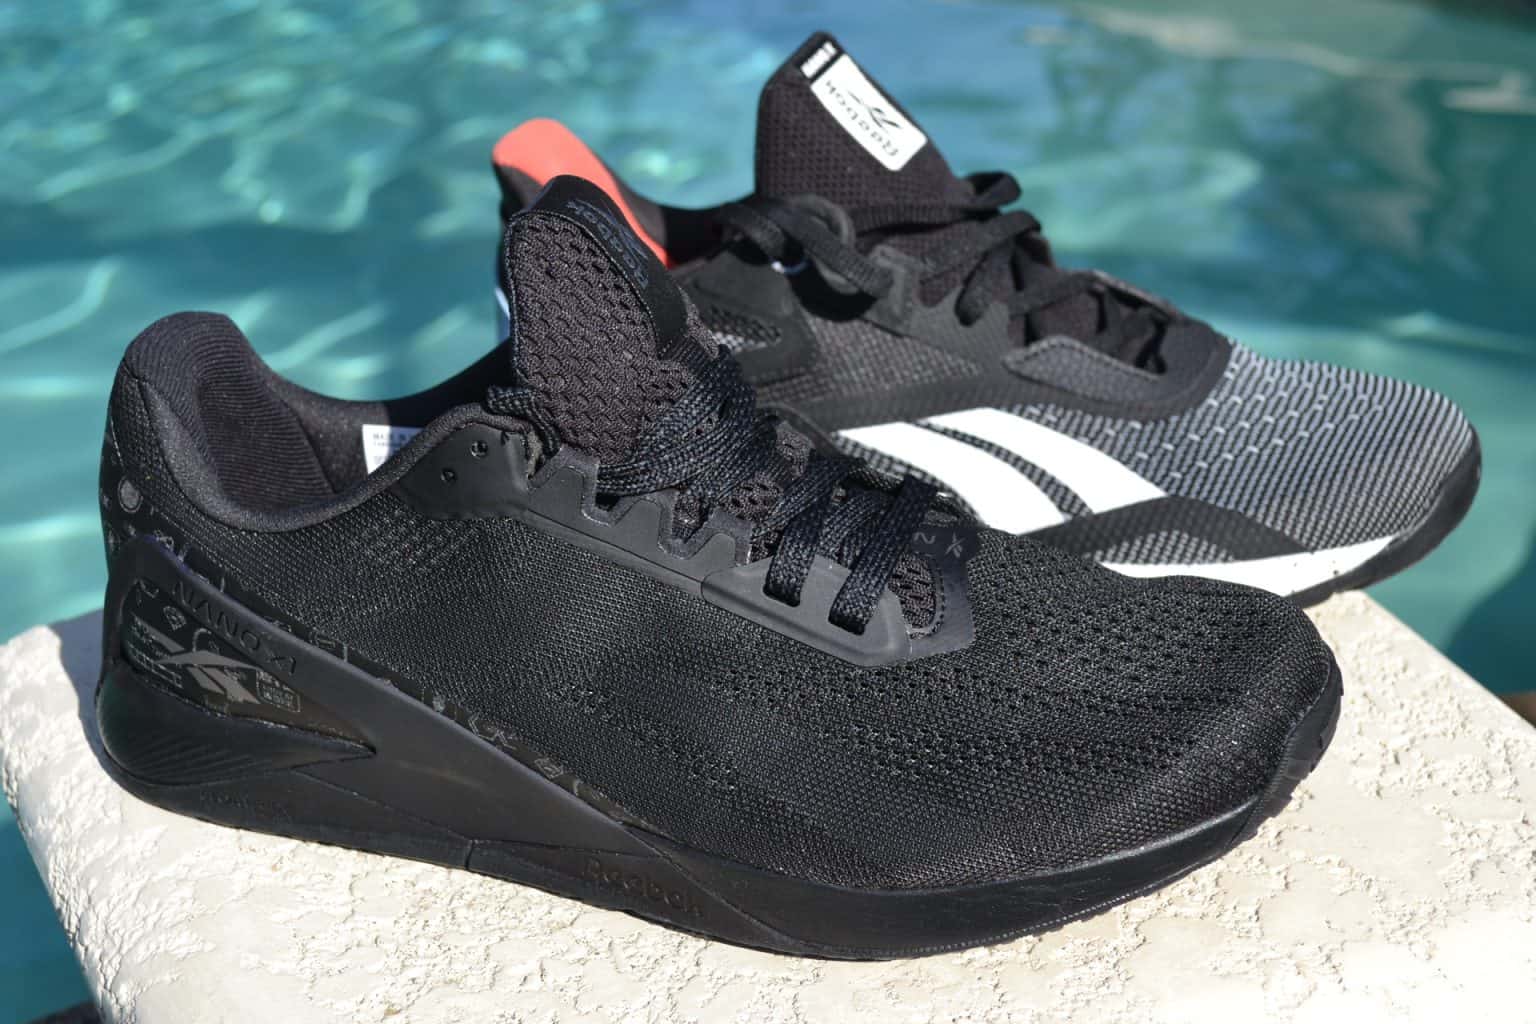 Reebok Nano X1 Training Shoe Review - Fit at Midlife